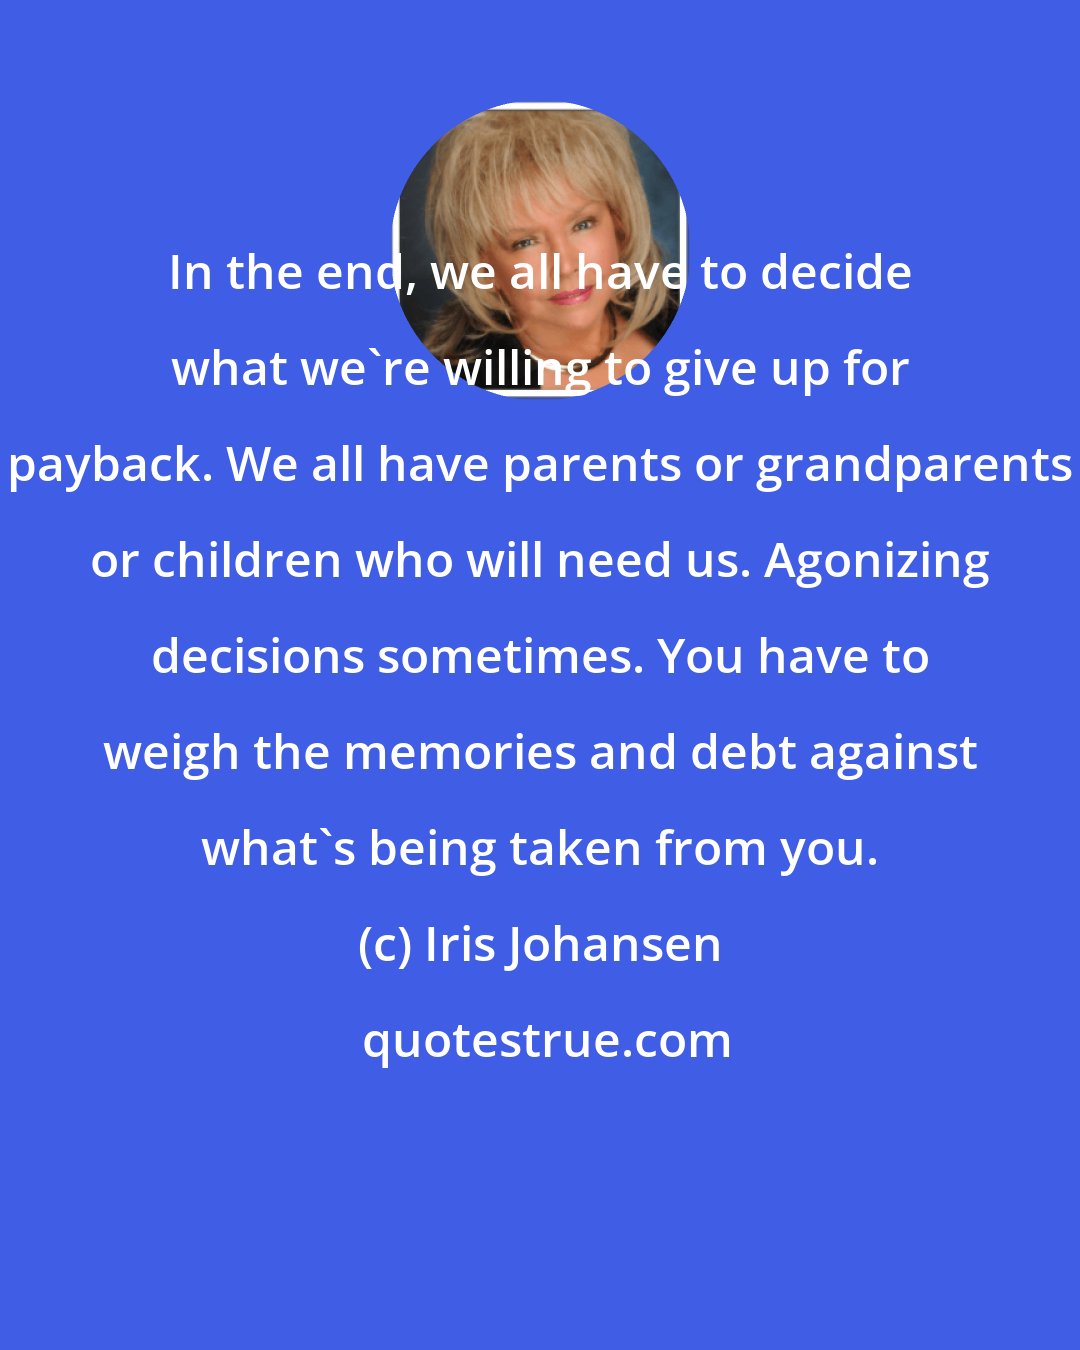 Iris Johansen: In the end, we all have to decide what we're willing to give up for payback. We all have parents or grandparents or children who will need us. Agonizing decisions sometimes. You have to weigh the memories and debt against what's being taken from you.